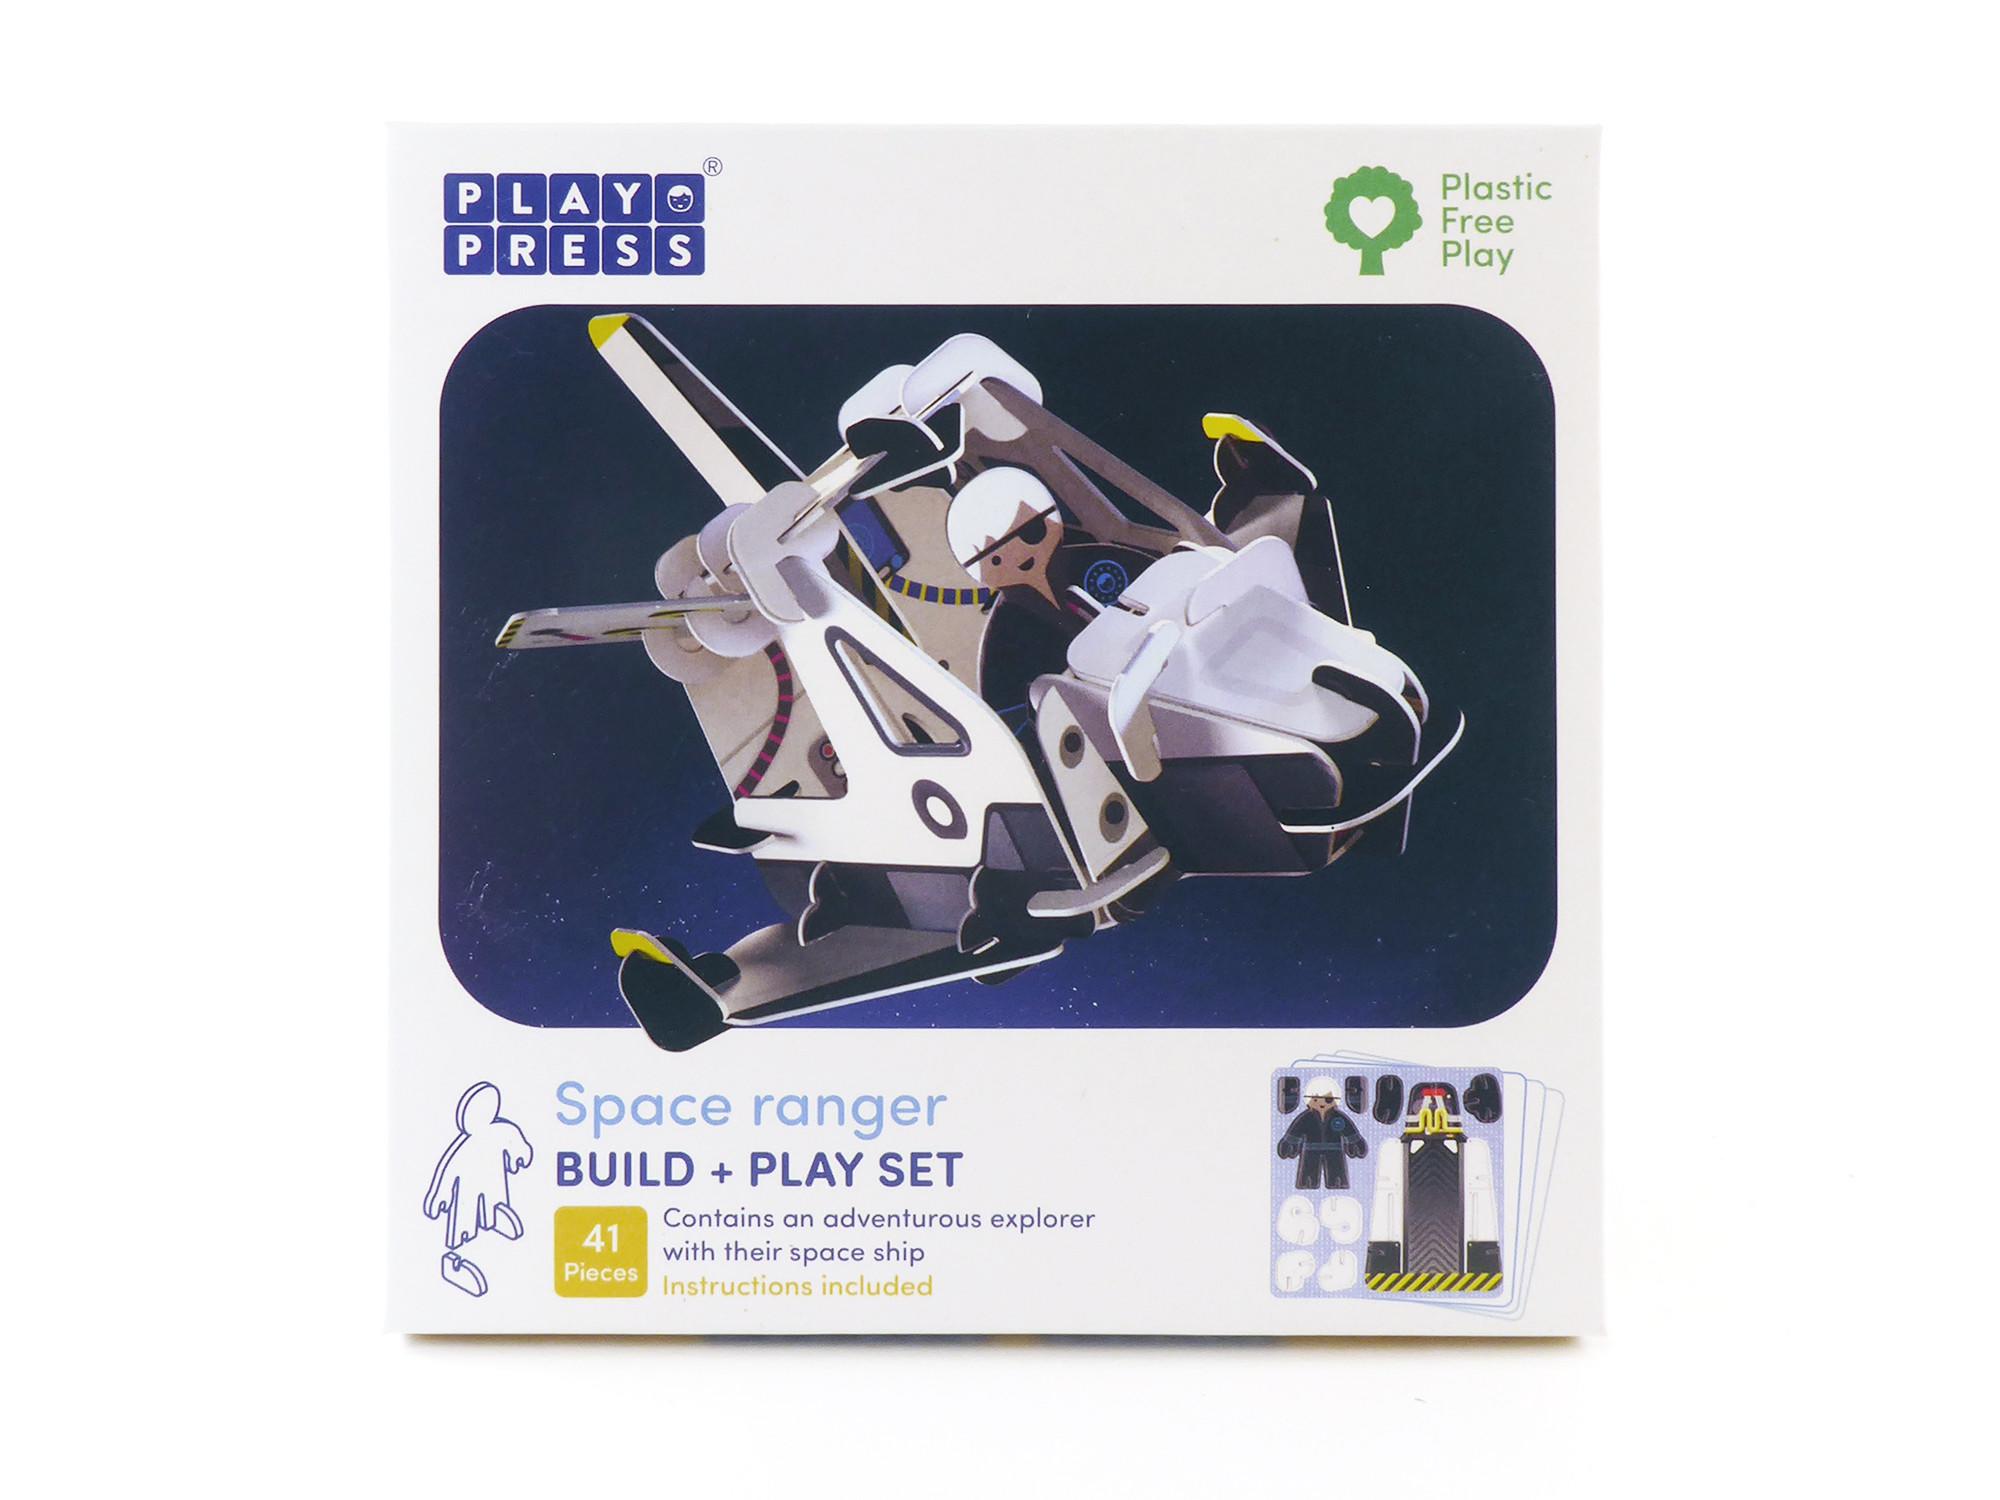 Box showing Play Press space ranger product.